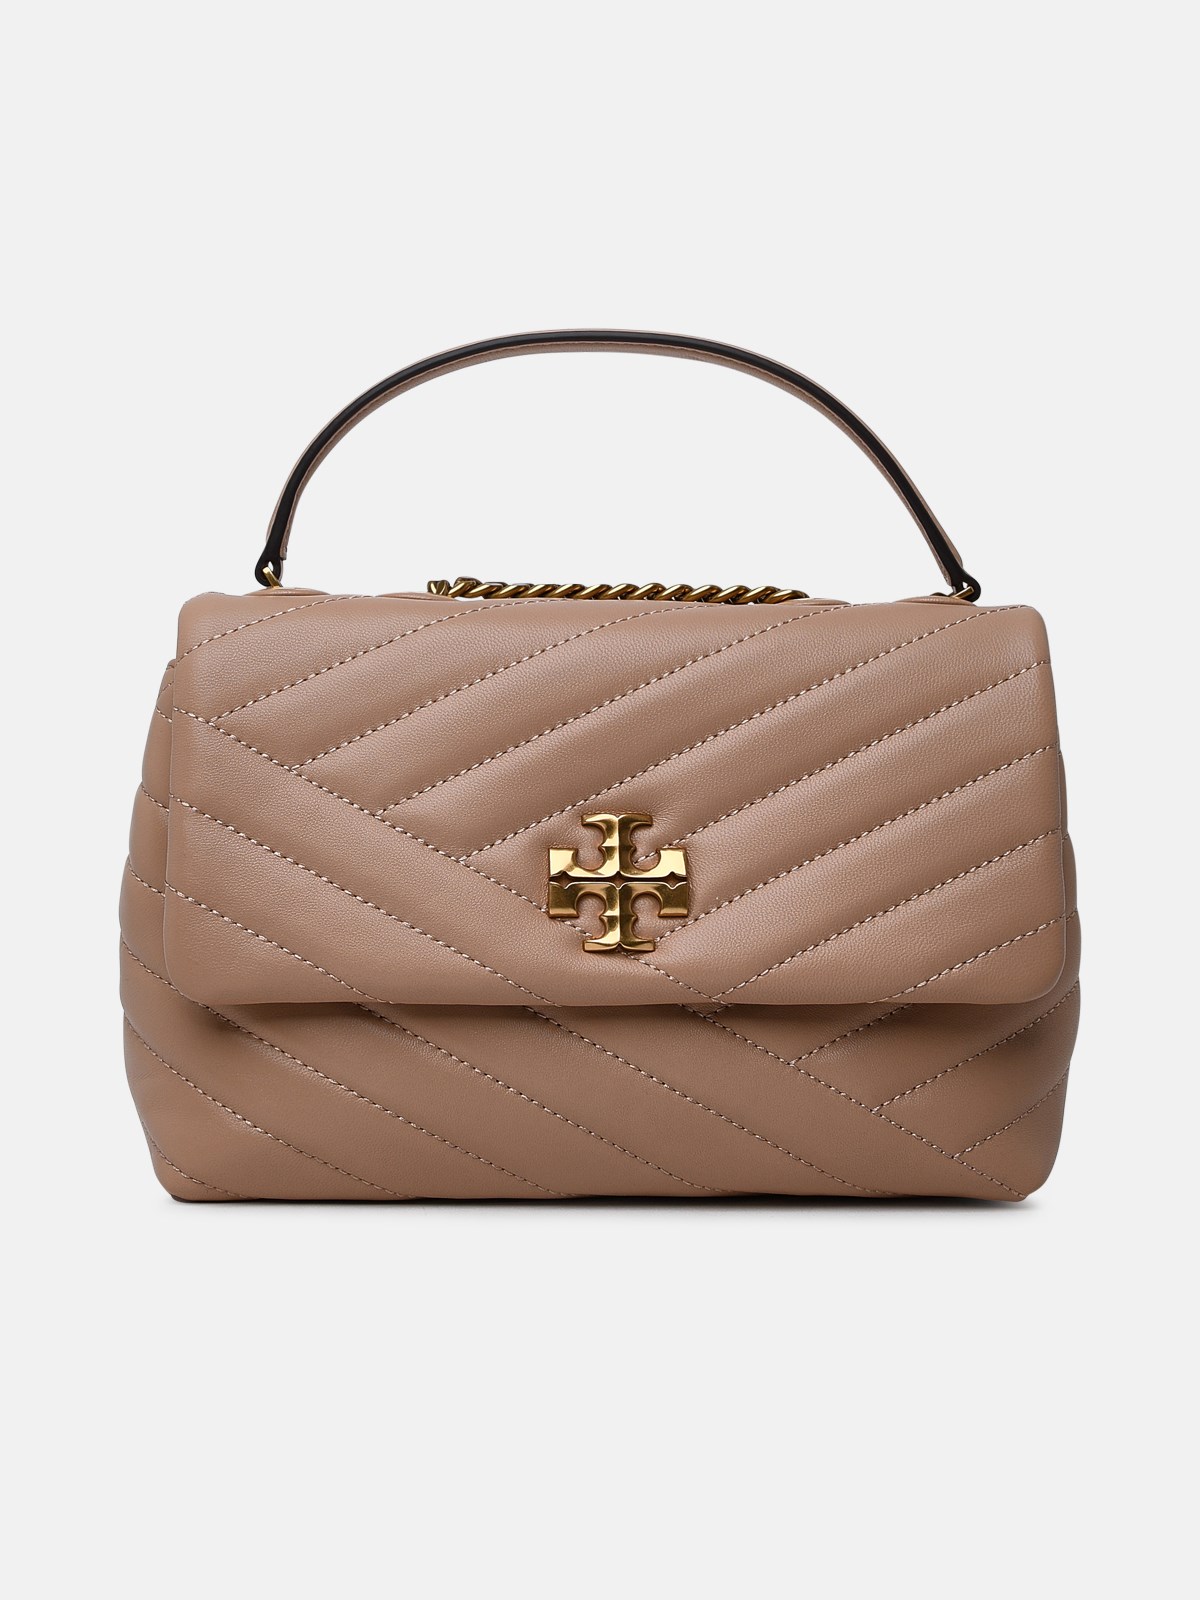 Tory Burch Old Rose Leather Kira Crossbody Bag In Pink | ModeSens